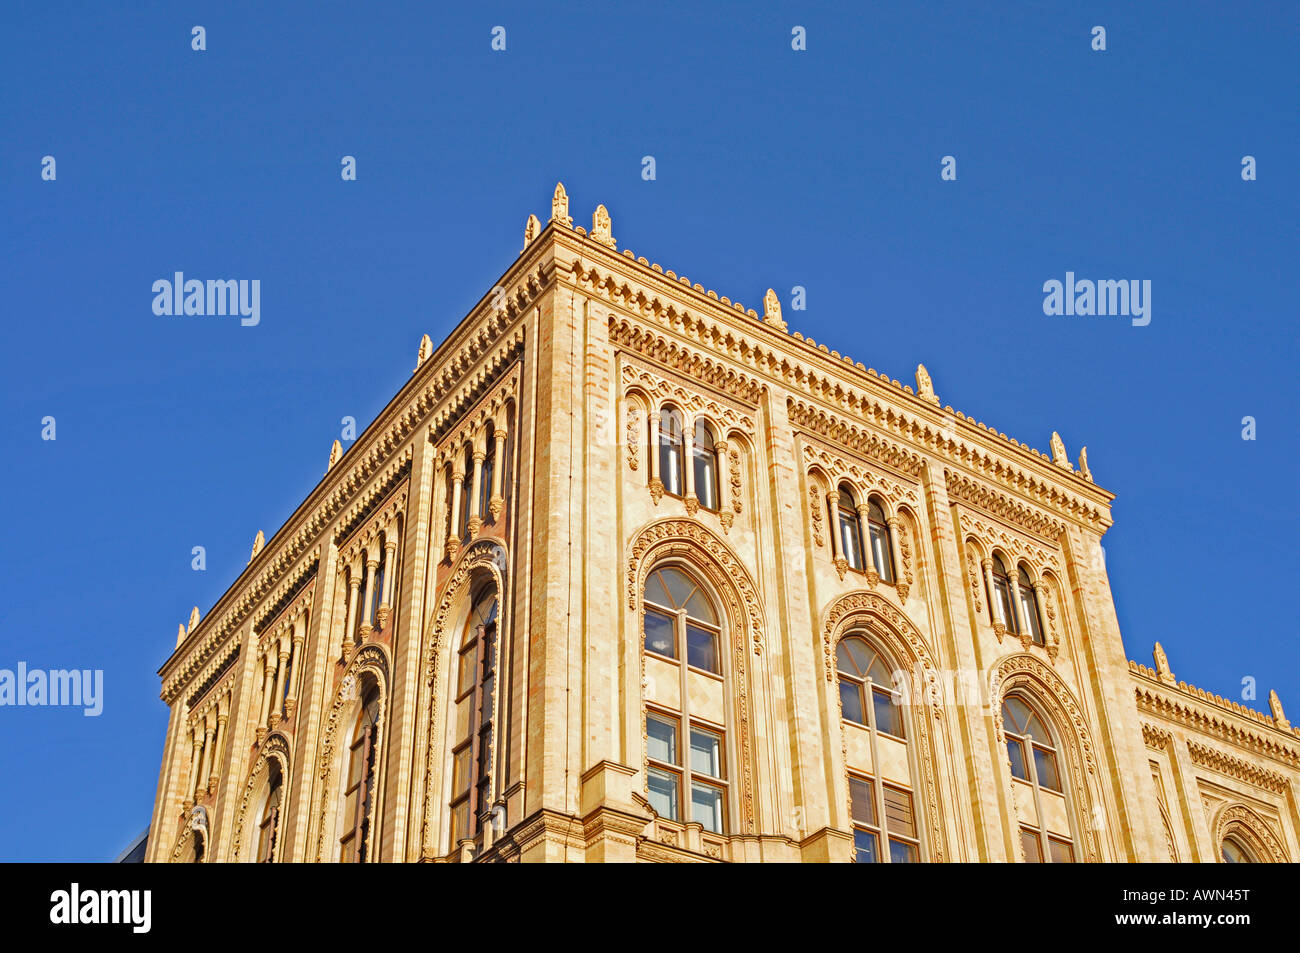 Upper Bavarian government buildings, Munich, Germany, Europe Stock Photo